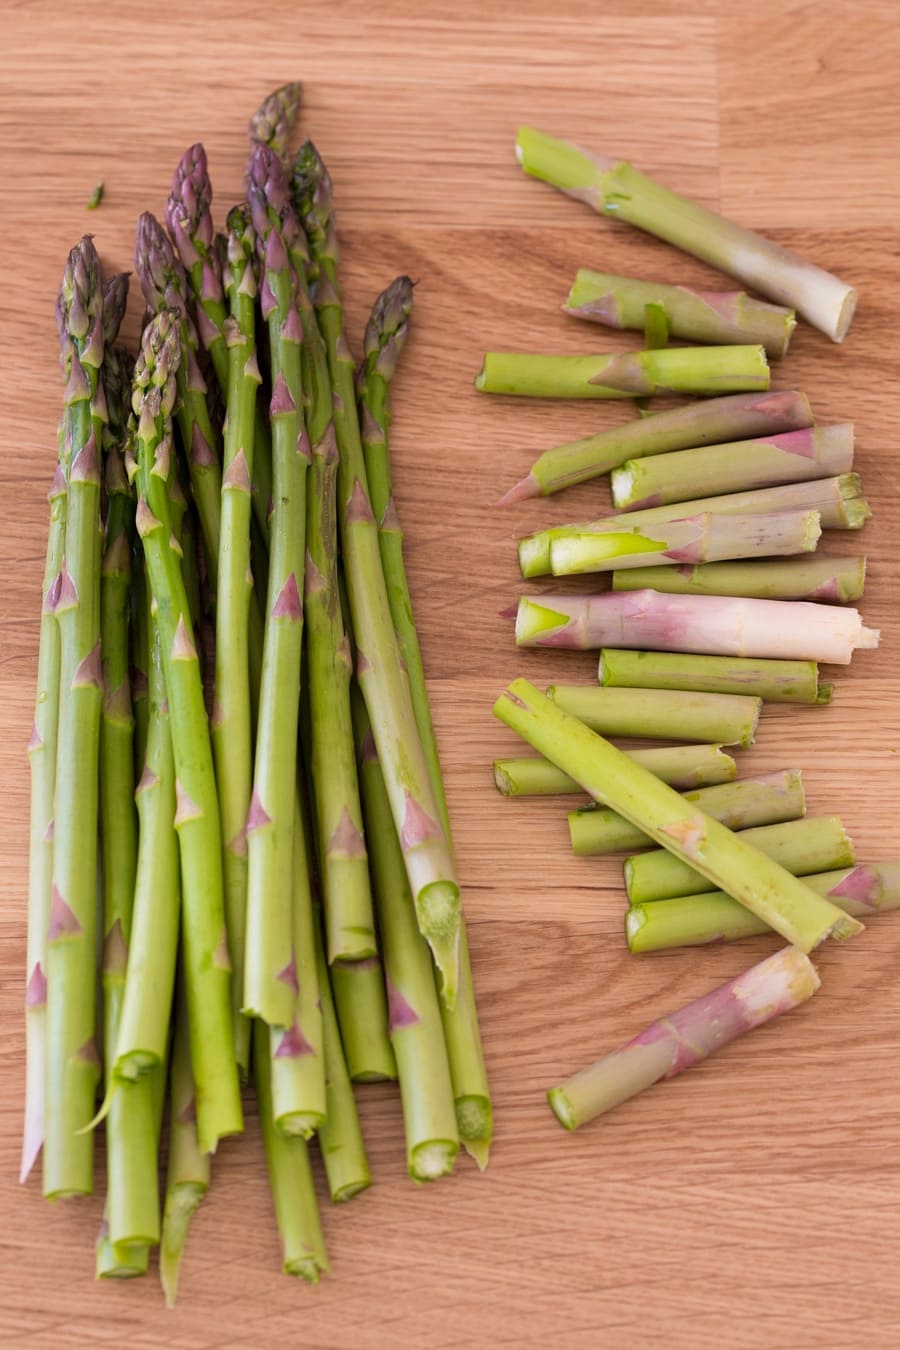 Asparagus stalks with woody ends separated.